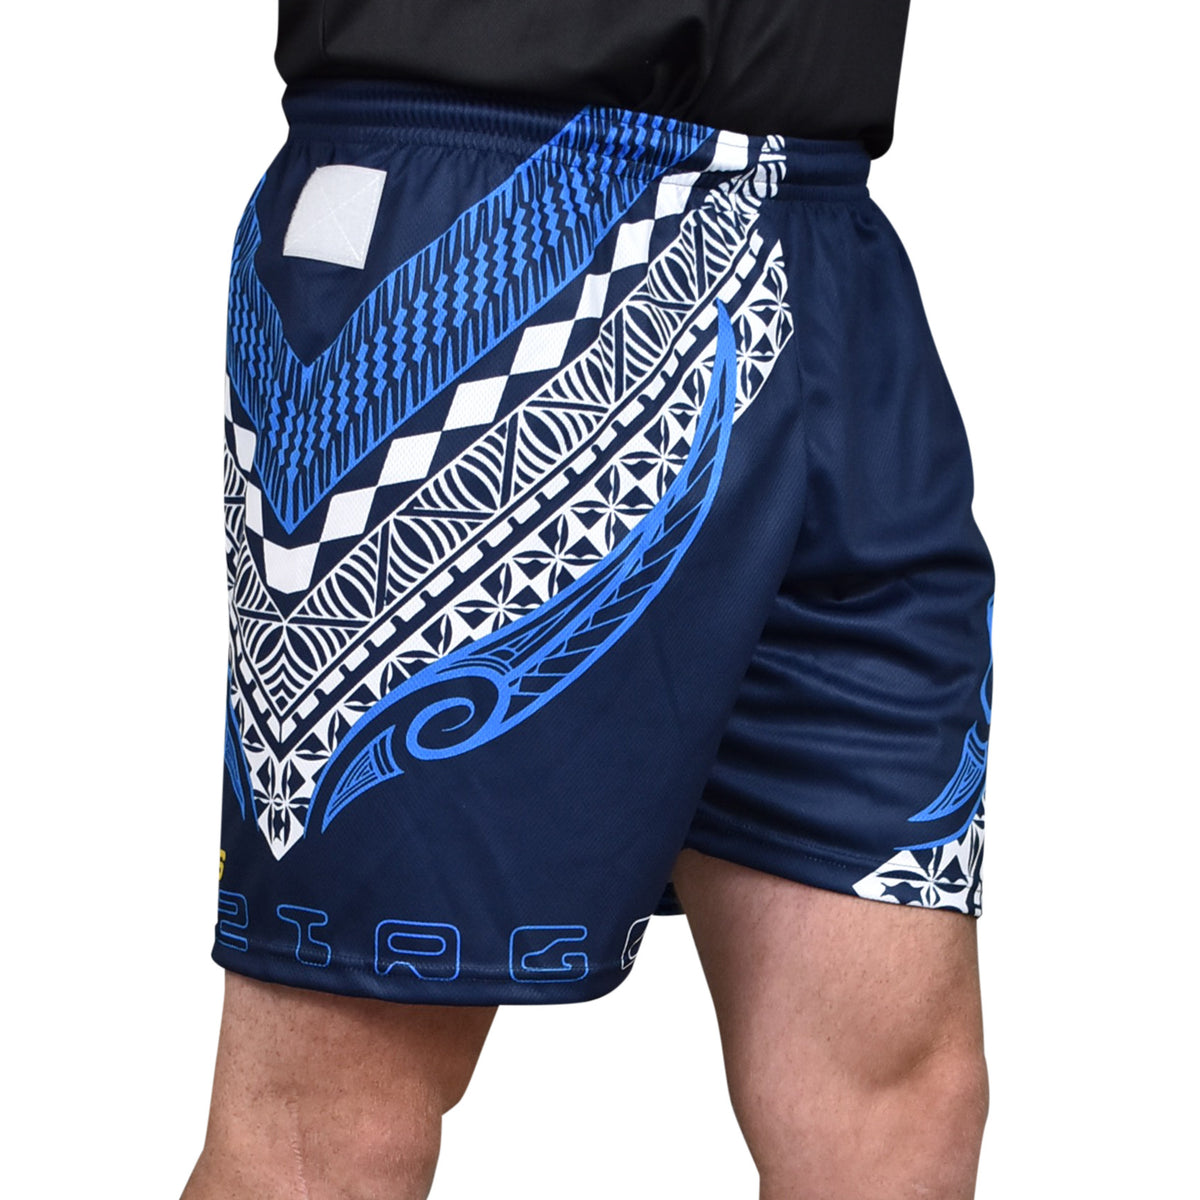 PACIFIC SHORTS – The Oztag Shop